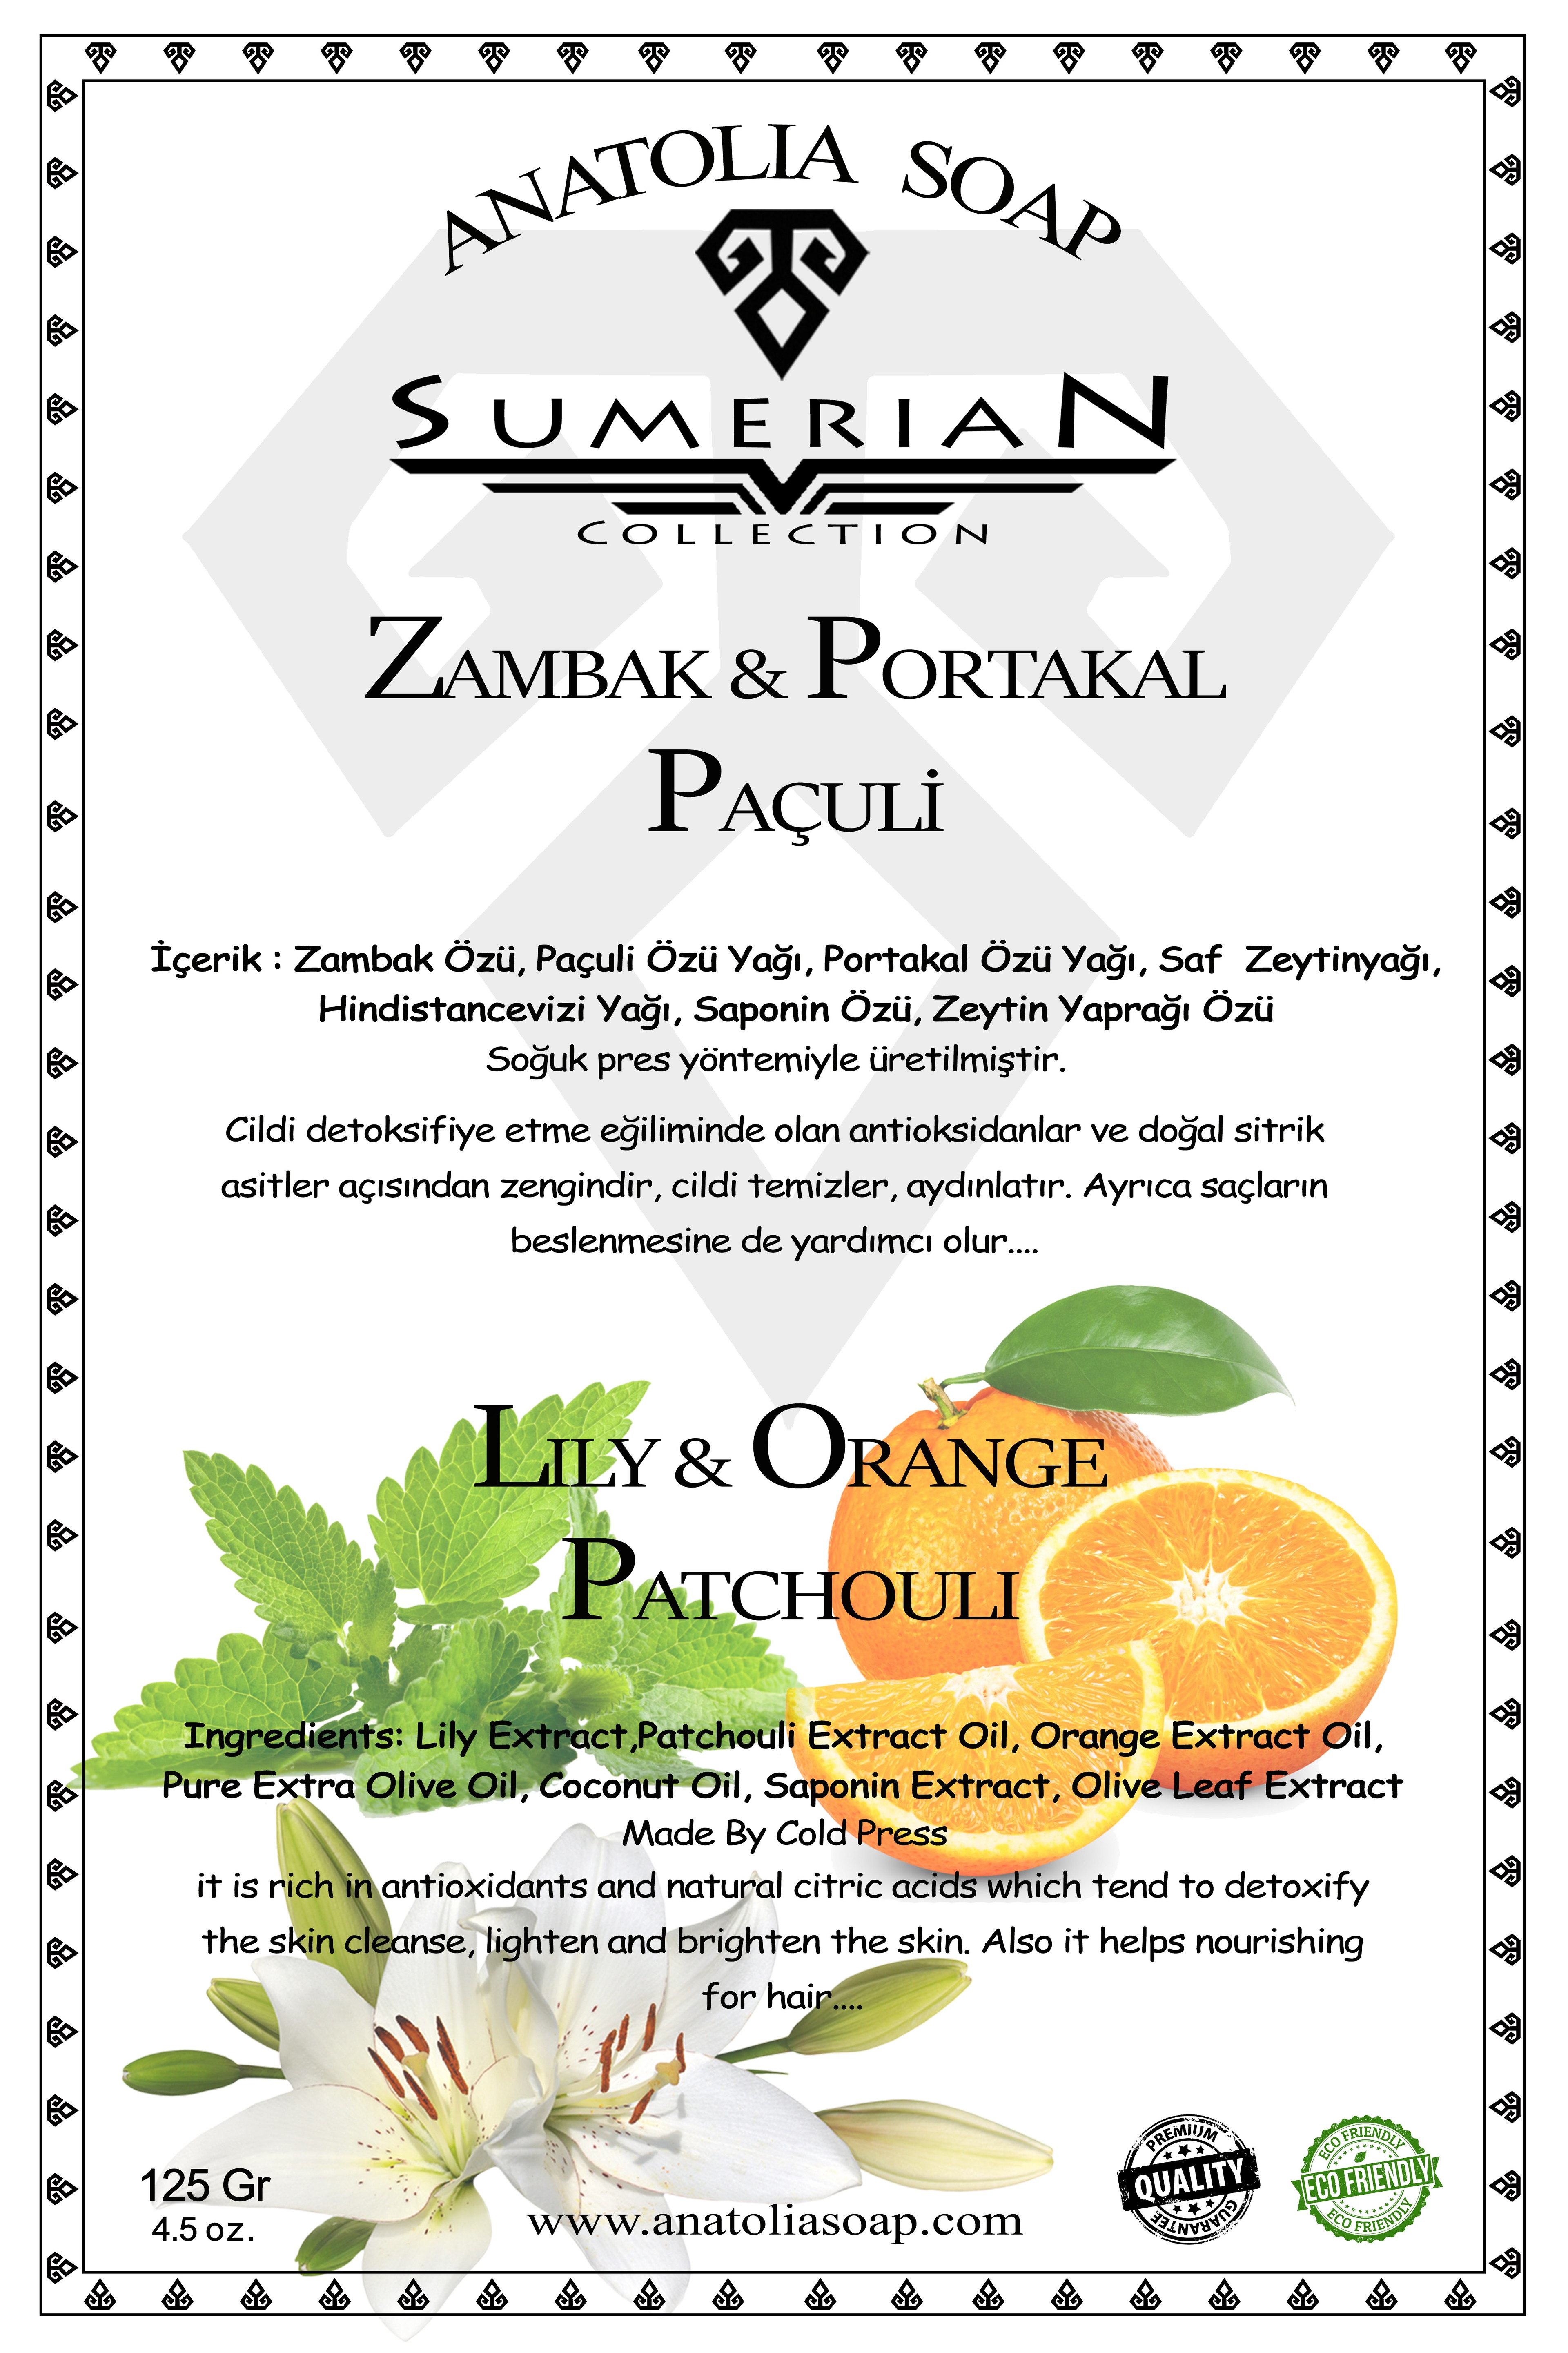 Sumerian Collection Patchouli Lily Orange Soap Has Aromatherapy Features and Helps Reduce Cellulite.